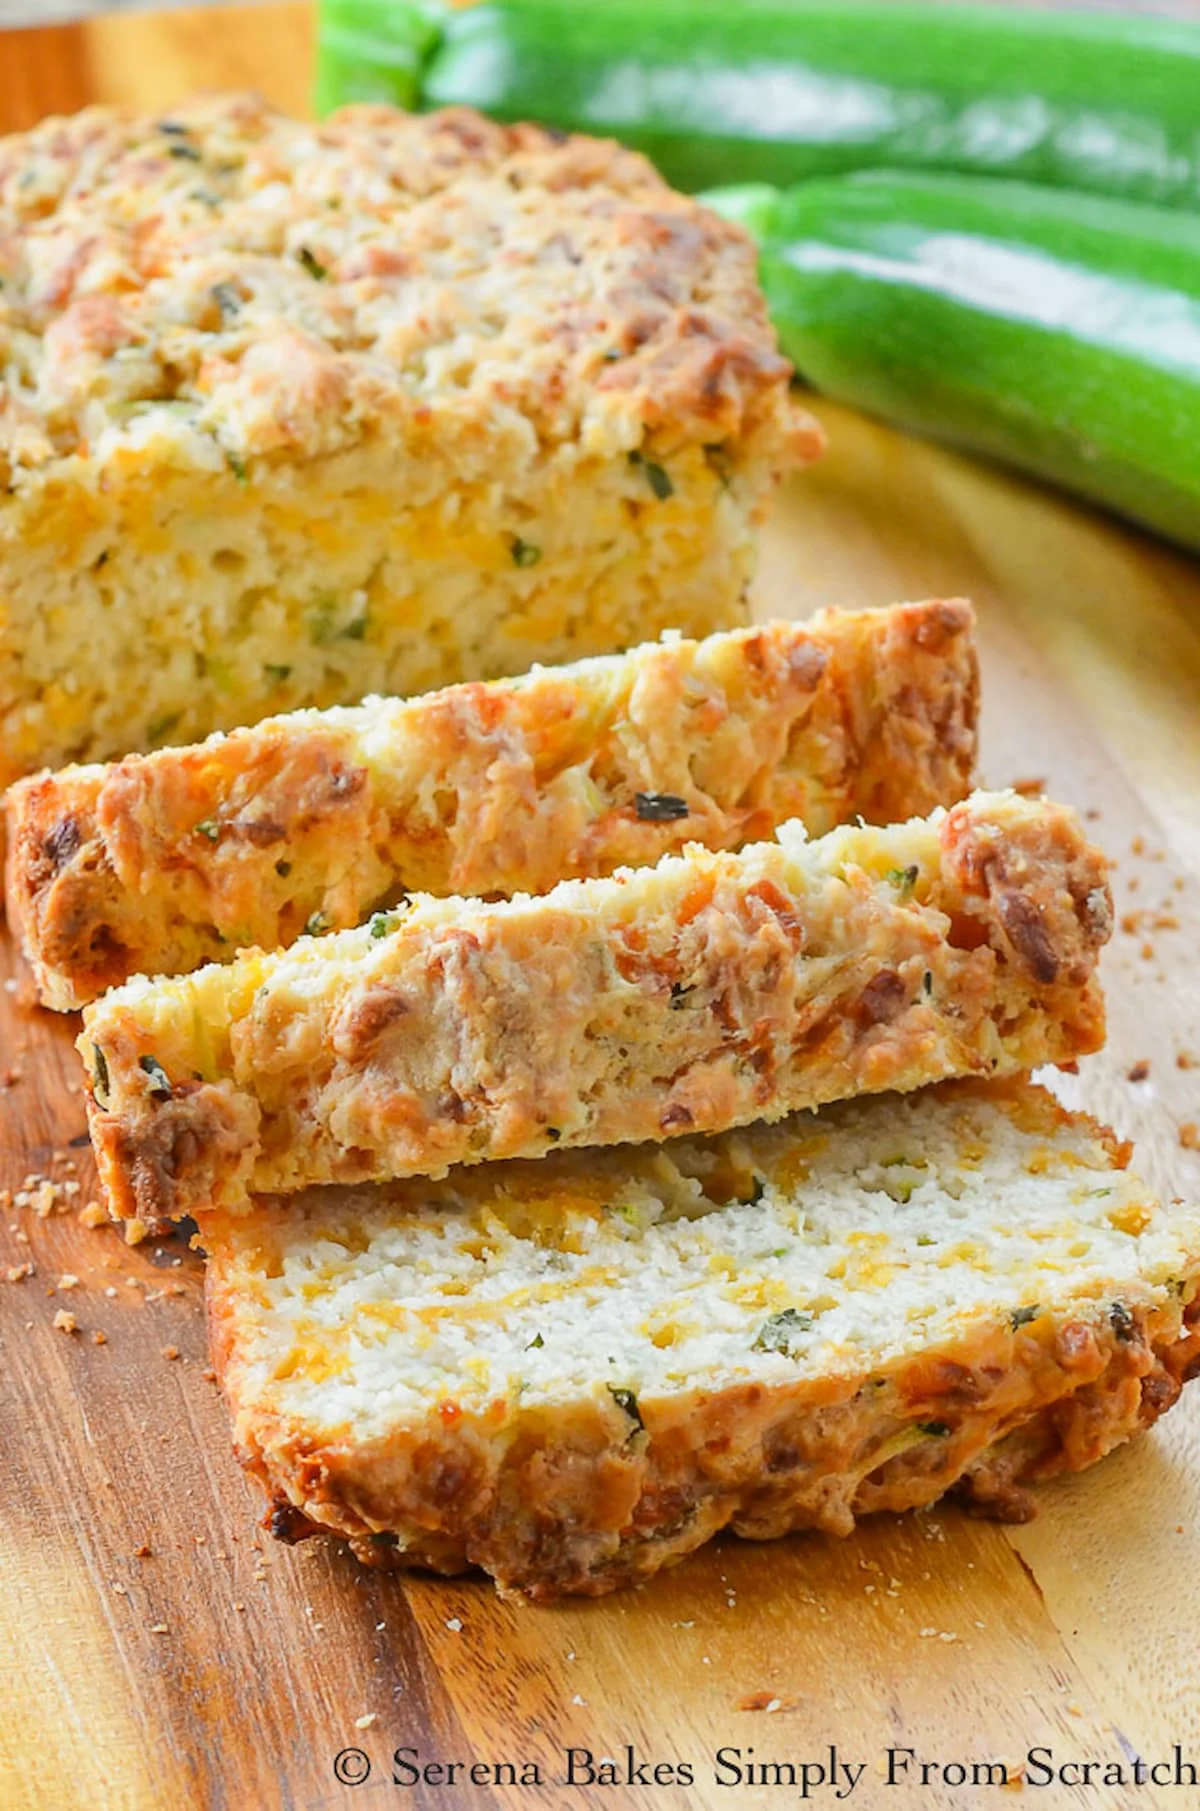 Zucchini Cheddar Cheese Beer Bread